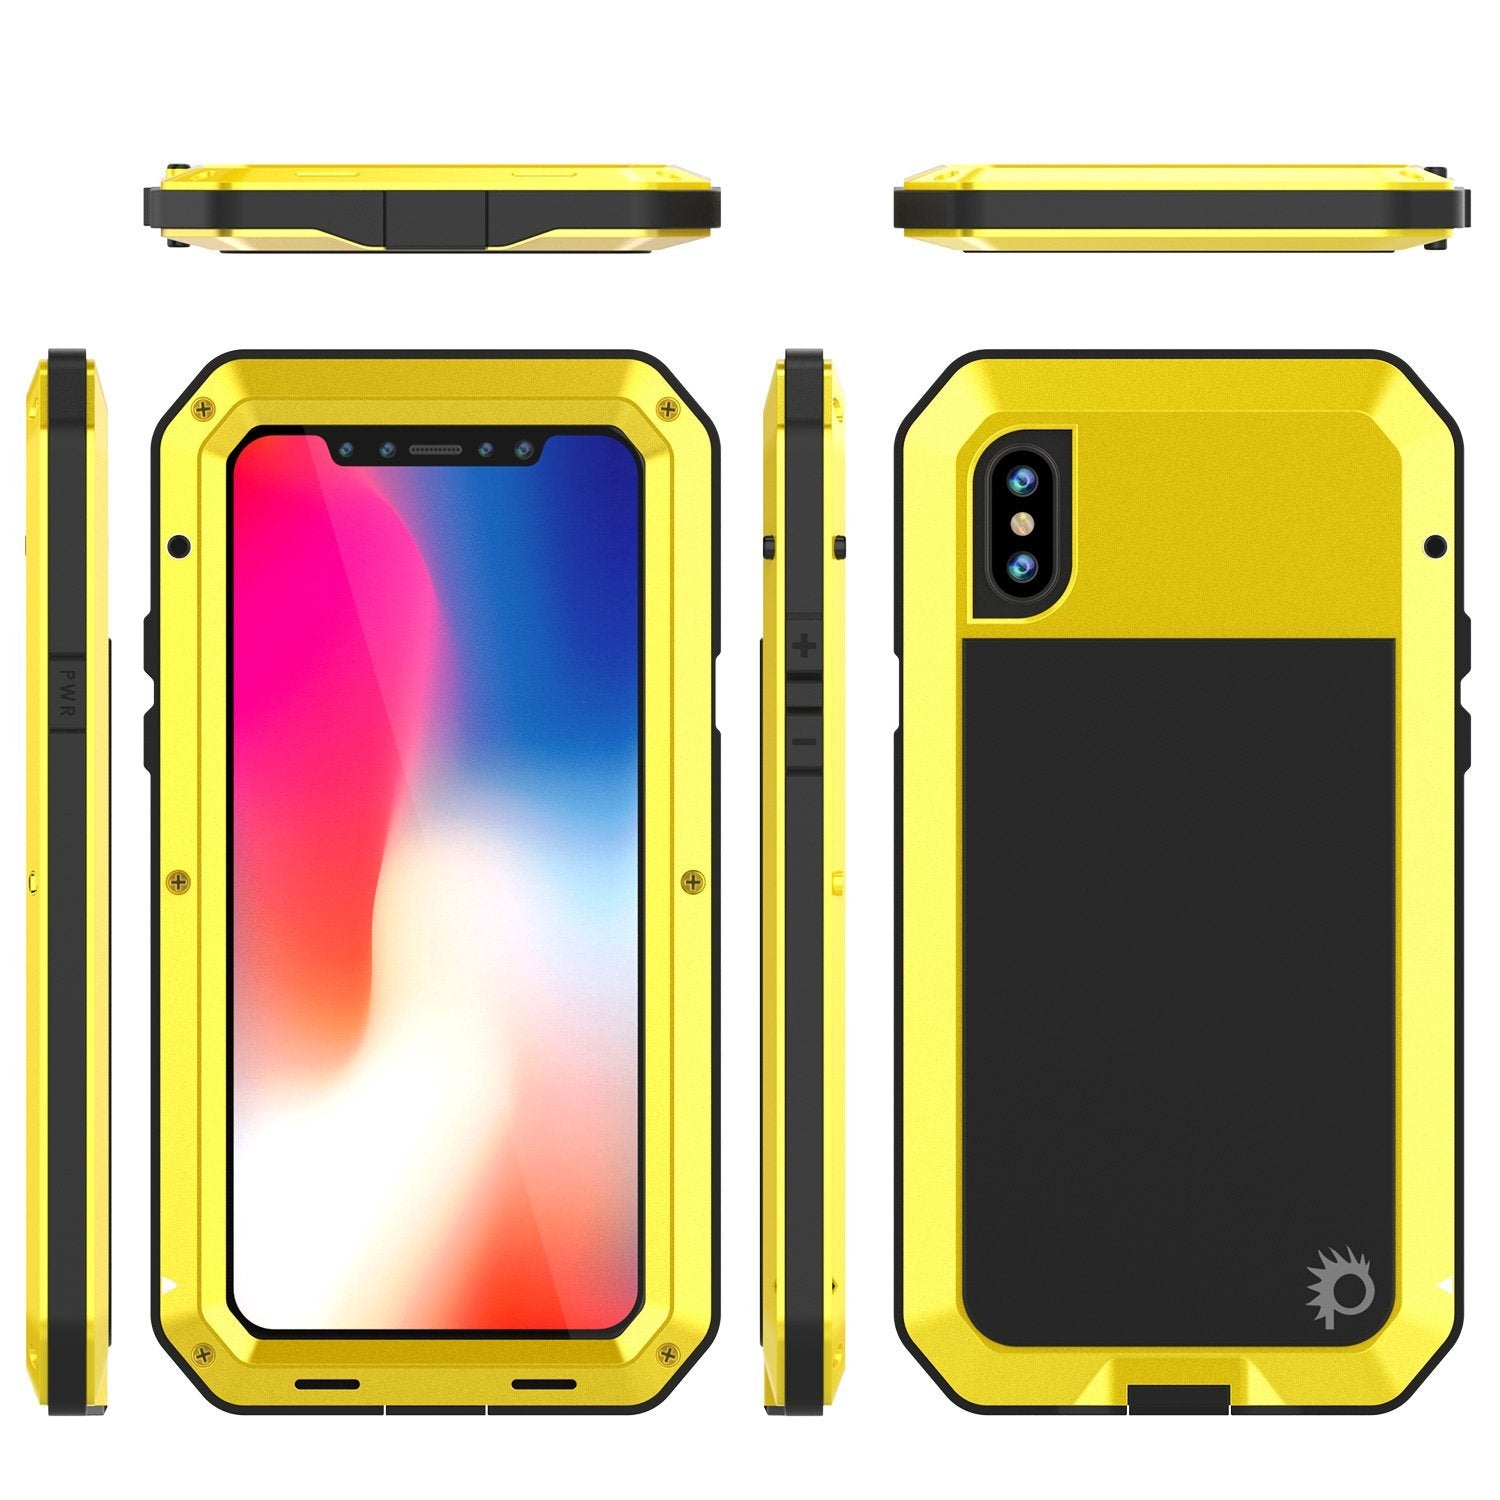 iPhone XR Metal Case, Heavy Duty Military Grade Armor Cover [shock proof] Full Body Hard [Neon]